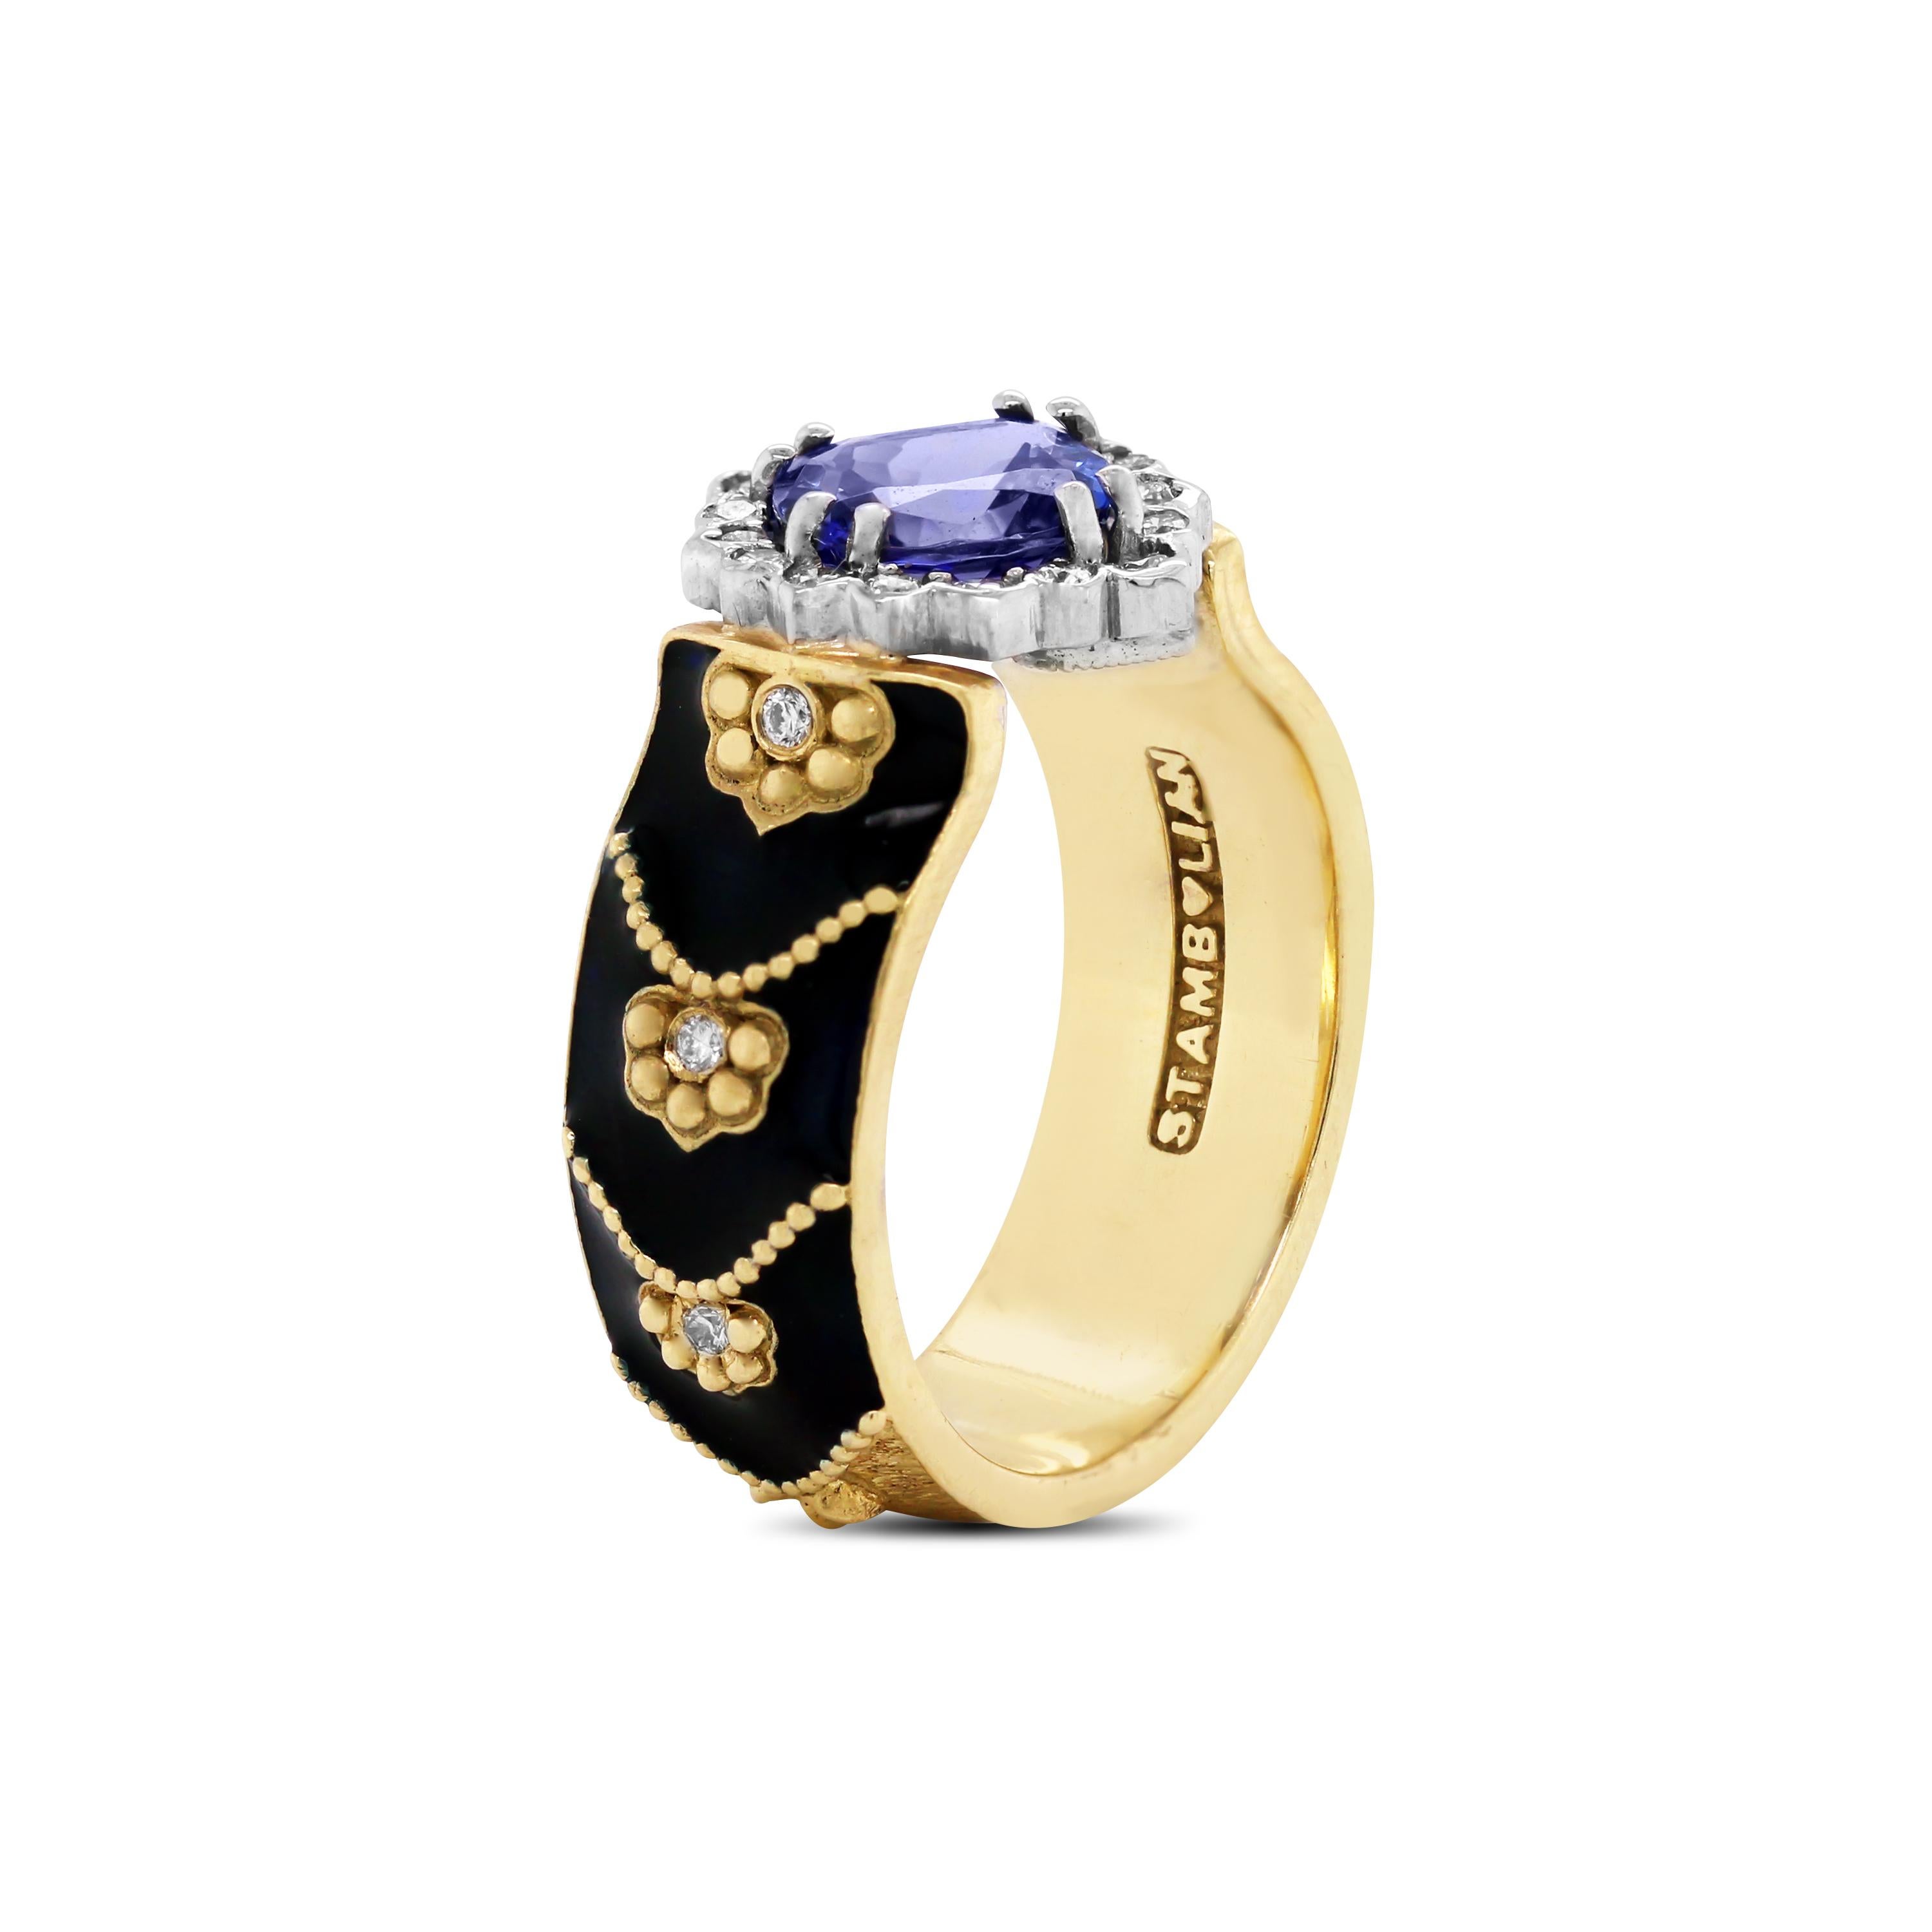 18K Gold Ring with Black Enamel and Tanzanite Center with Diamonds by Stambolian

This unique ring from the Stambolian 